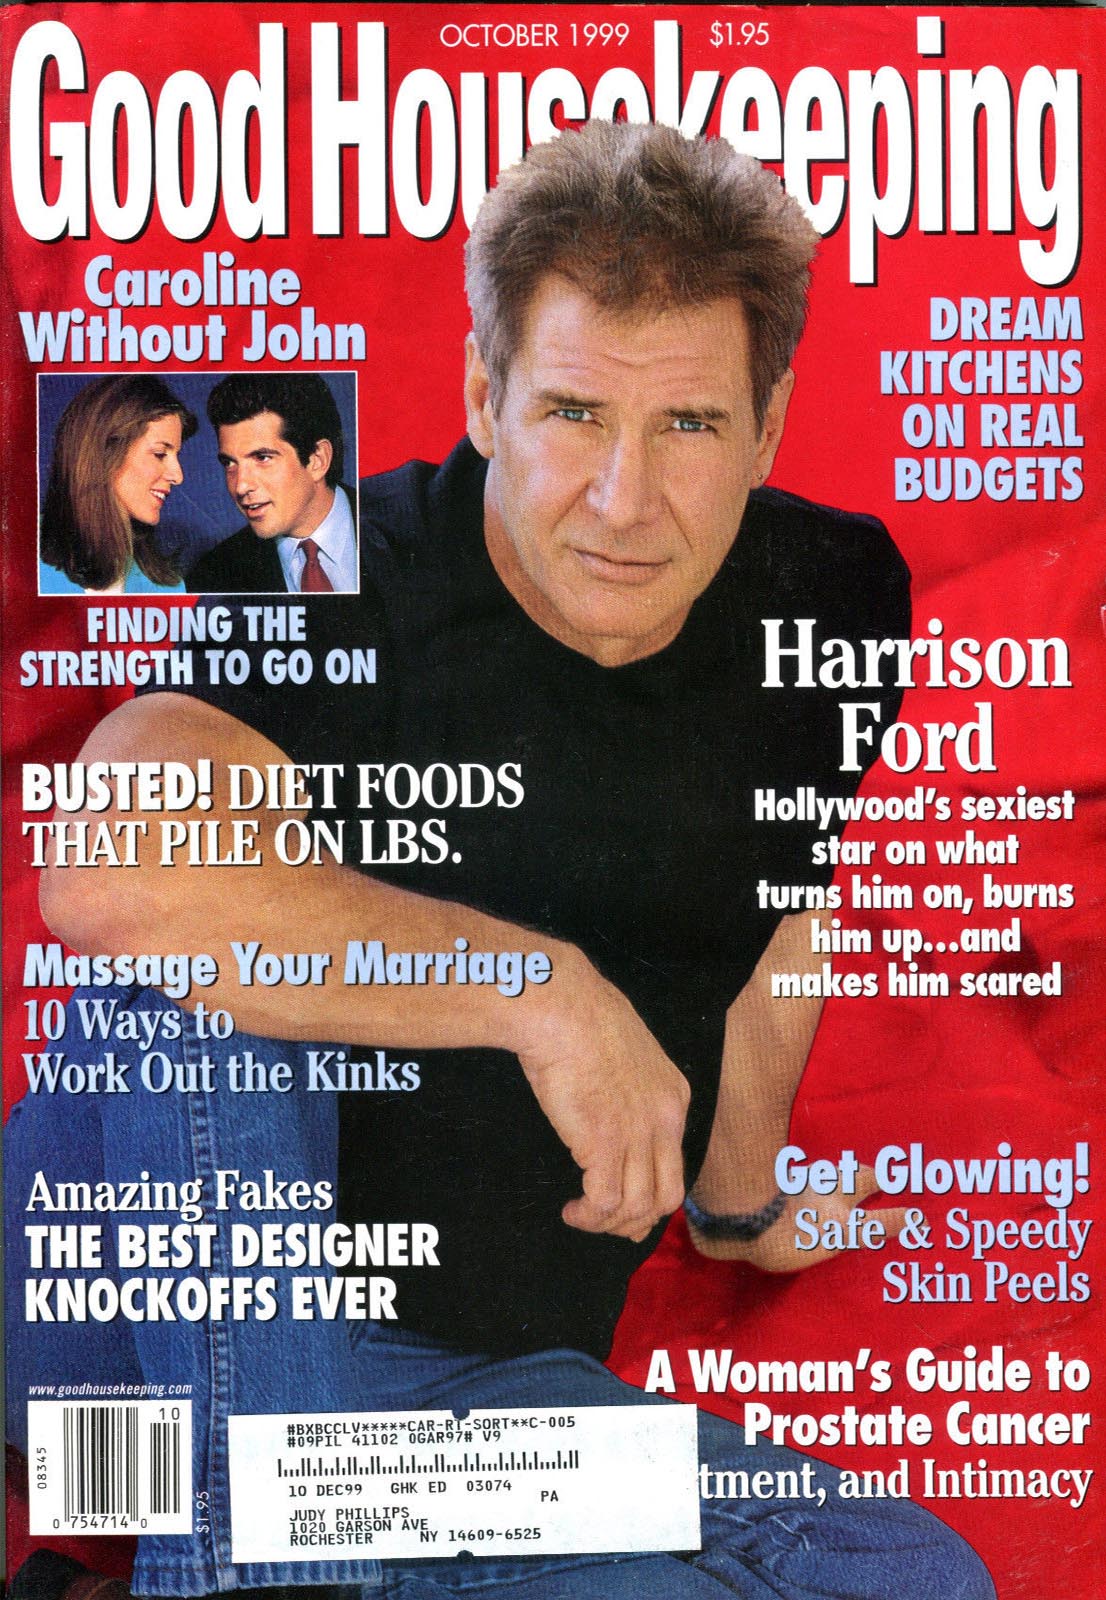 Good Housekeeping October 1999 magazine back issue Good Housekeeping magizine back copy Good Housekeeping October 1999 American womens magazine Back Issue Published by Hearst Publishing Corporation. Covergirl Harrison Ford.